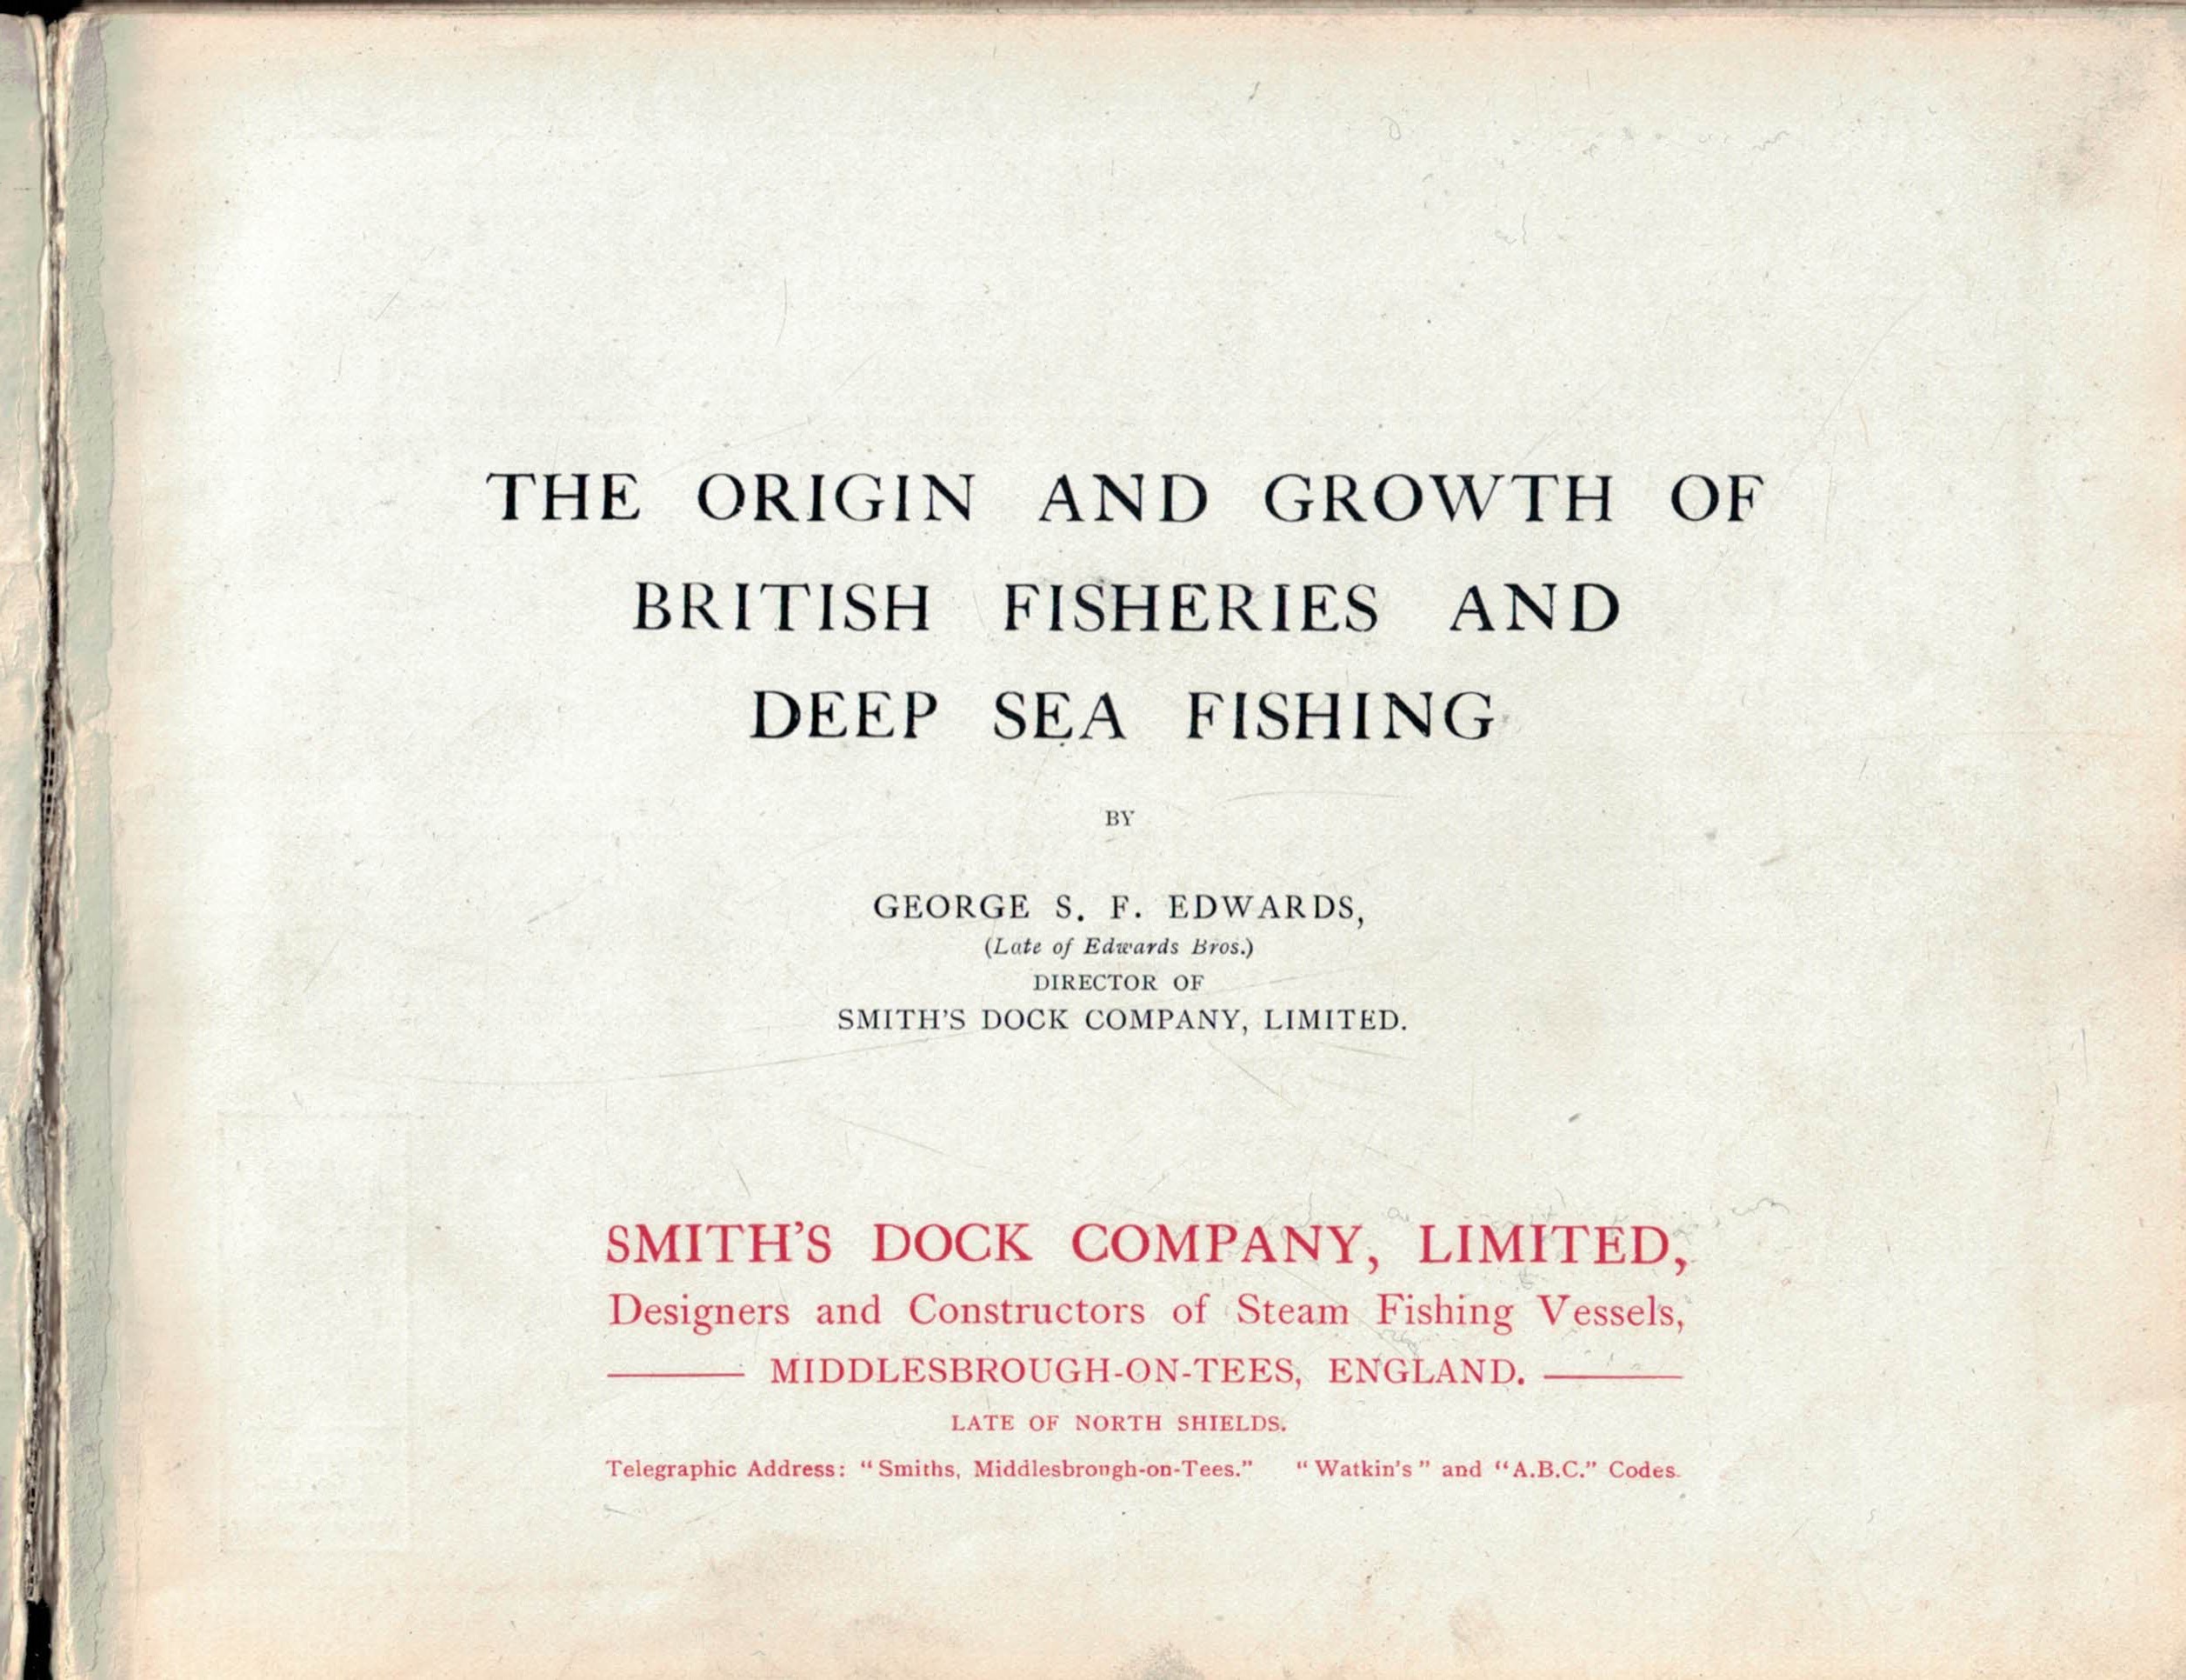 The Origin and Growth of British Fisheries and Deep Sea Fishing